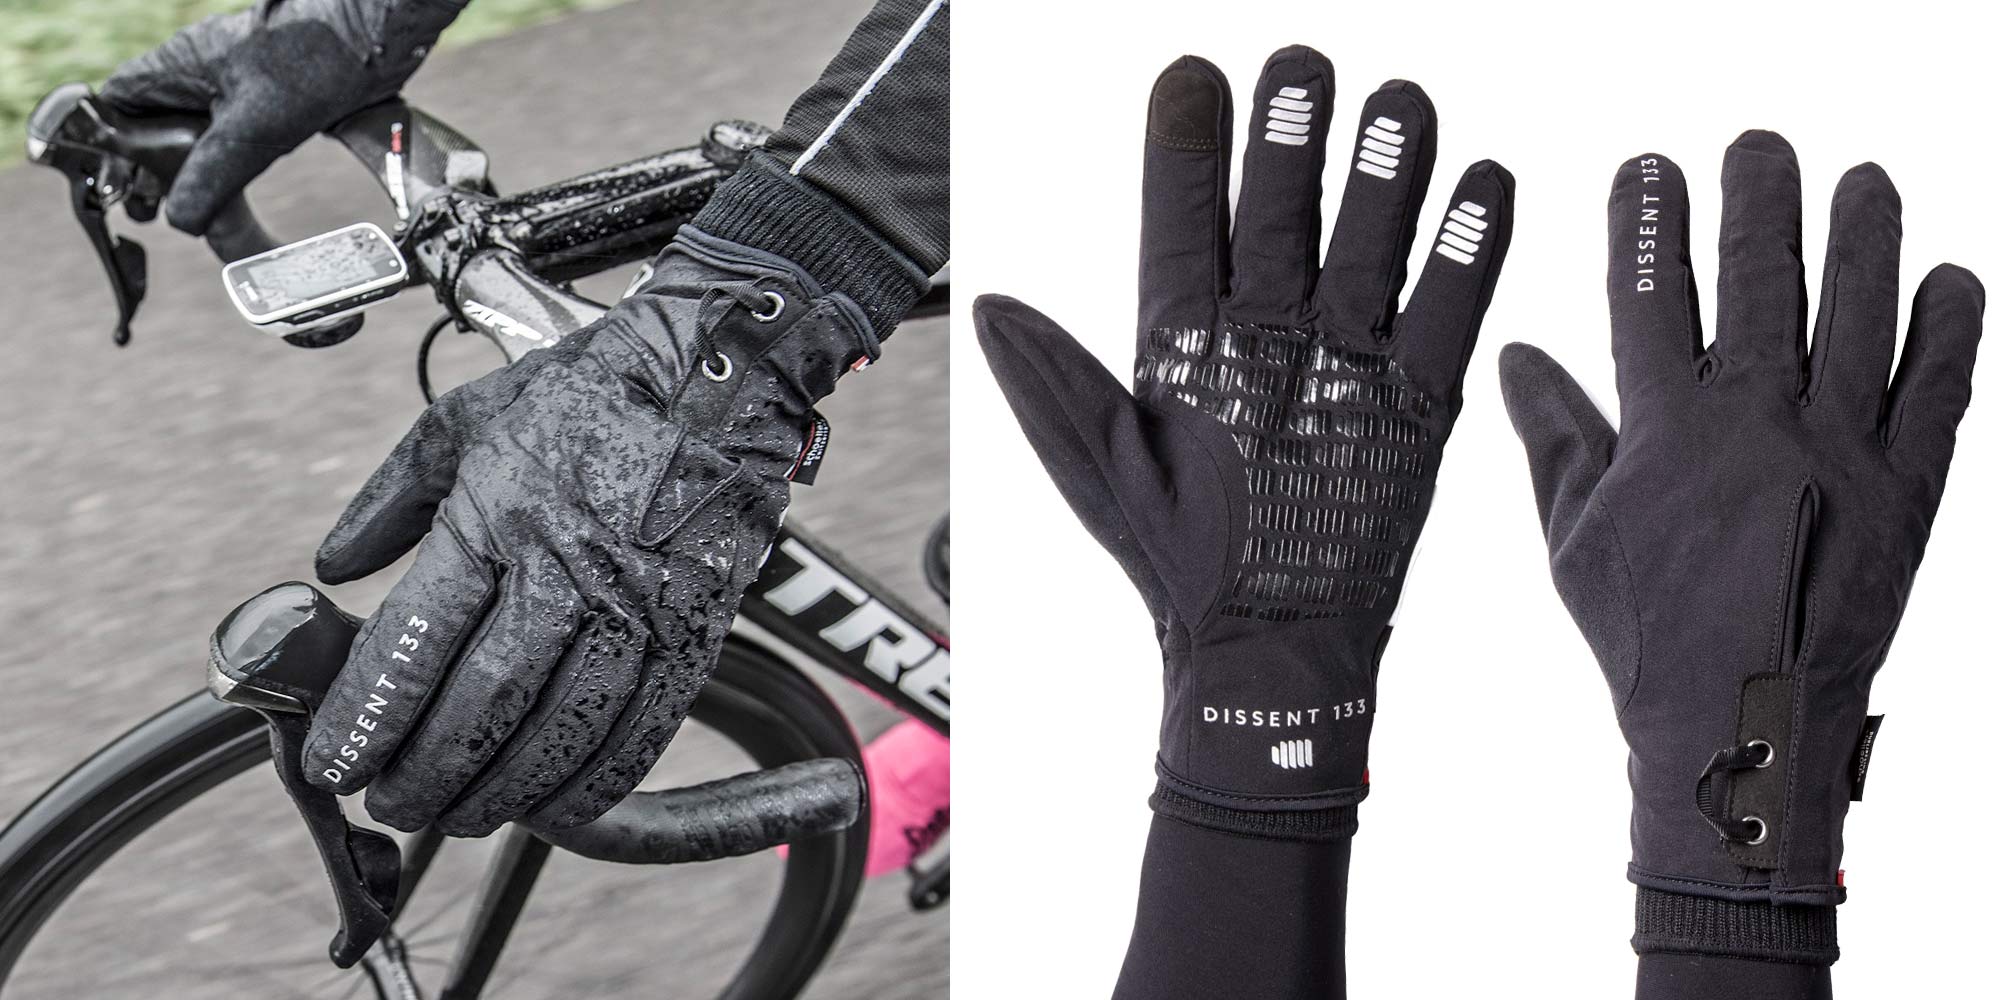 Dissent 133 by TheRiderFirm layered winter biking gloves wet cold cycling glove system OutDry waterproof shell glove